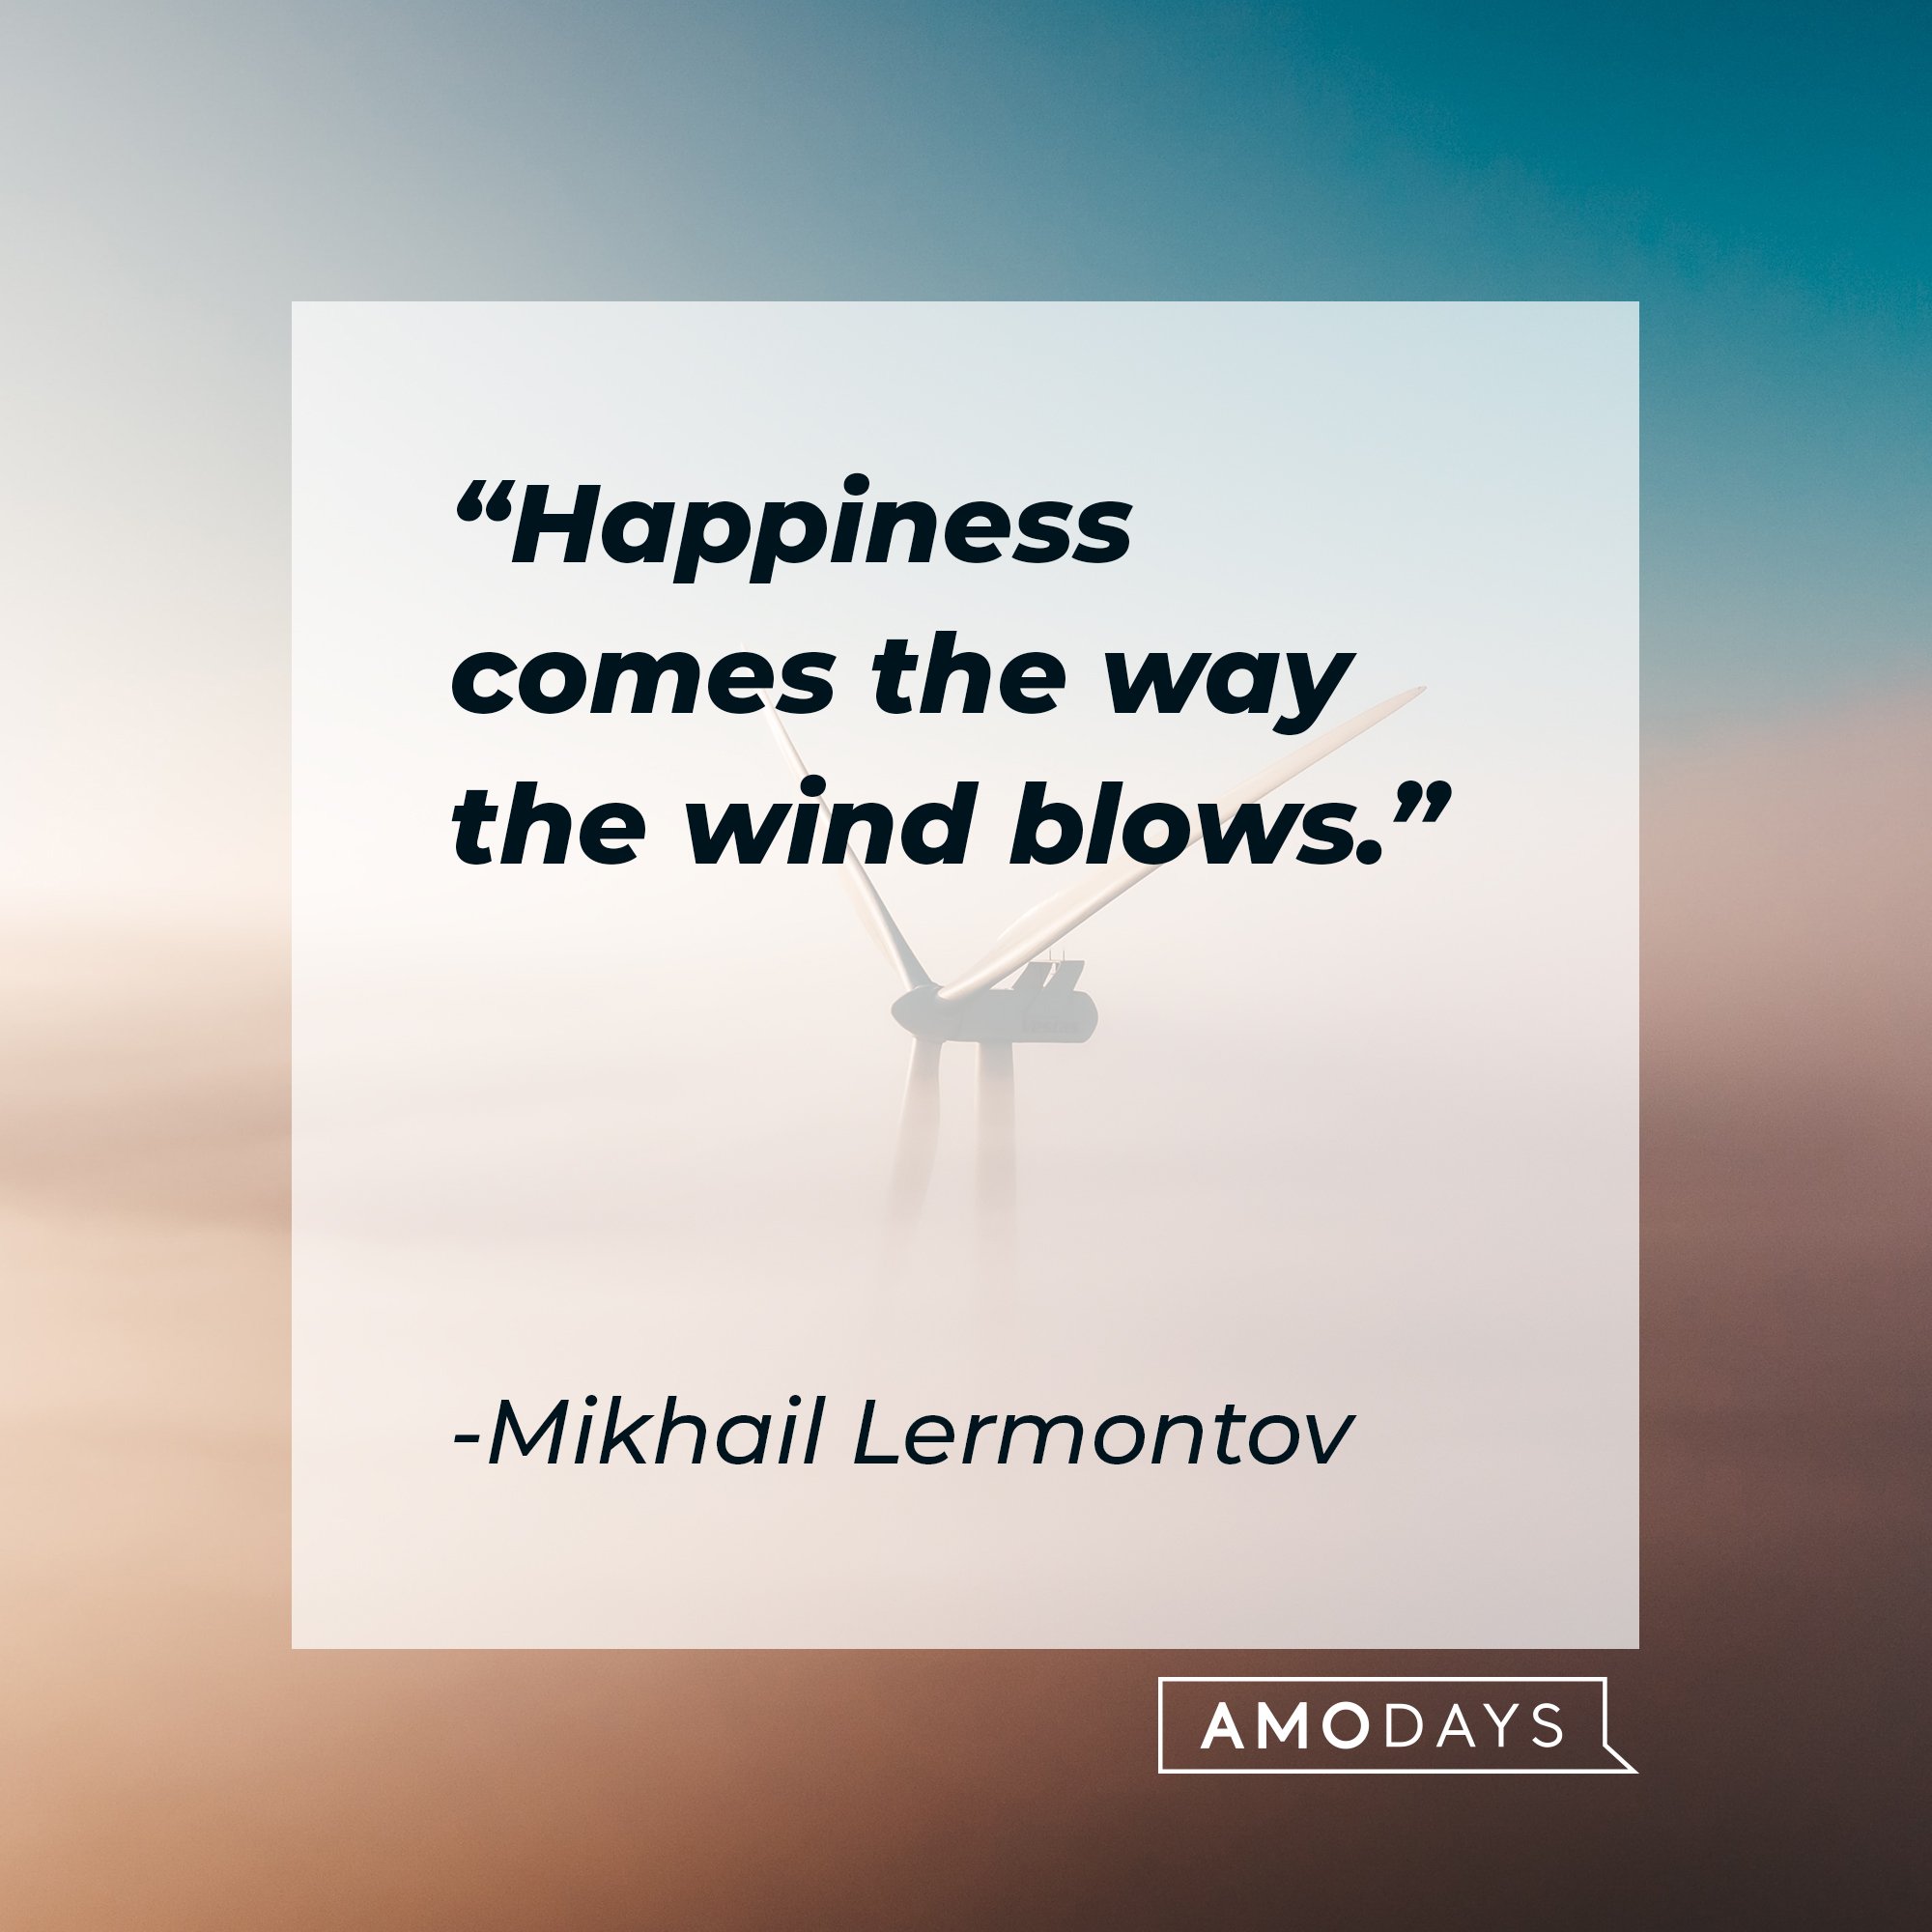 Mikhail Lermontov's quote: "Happiness comes the way the wind blows." | Image: AmoDays